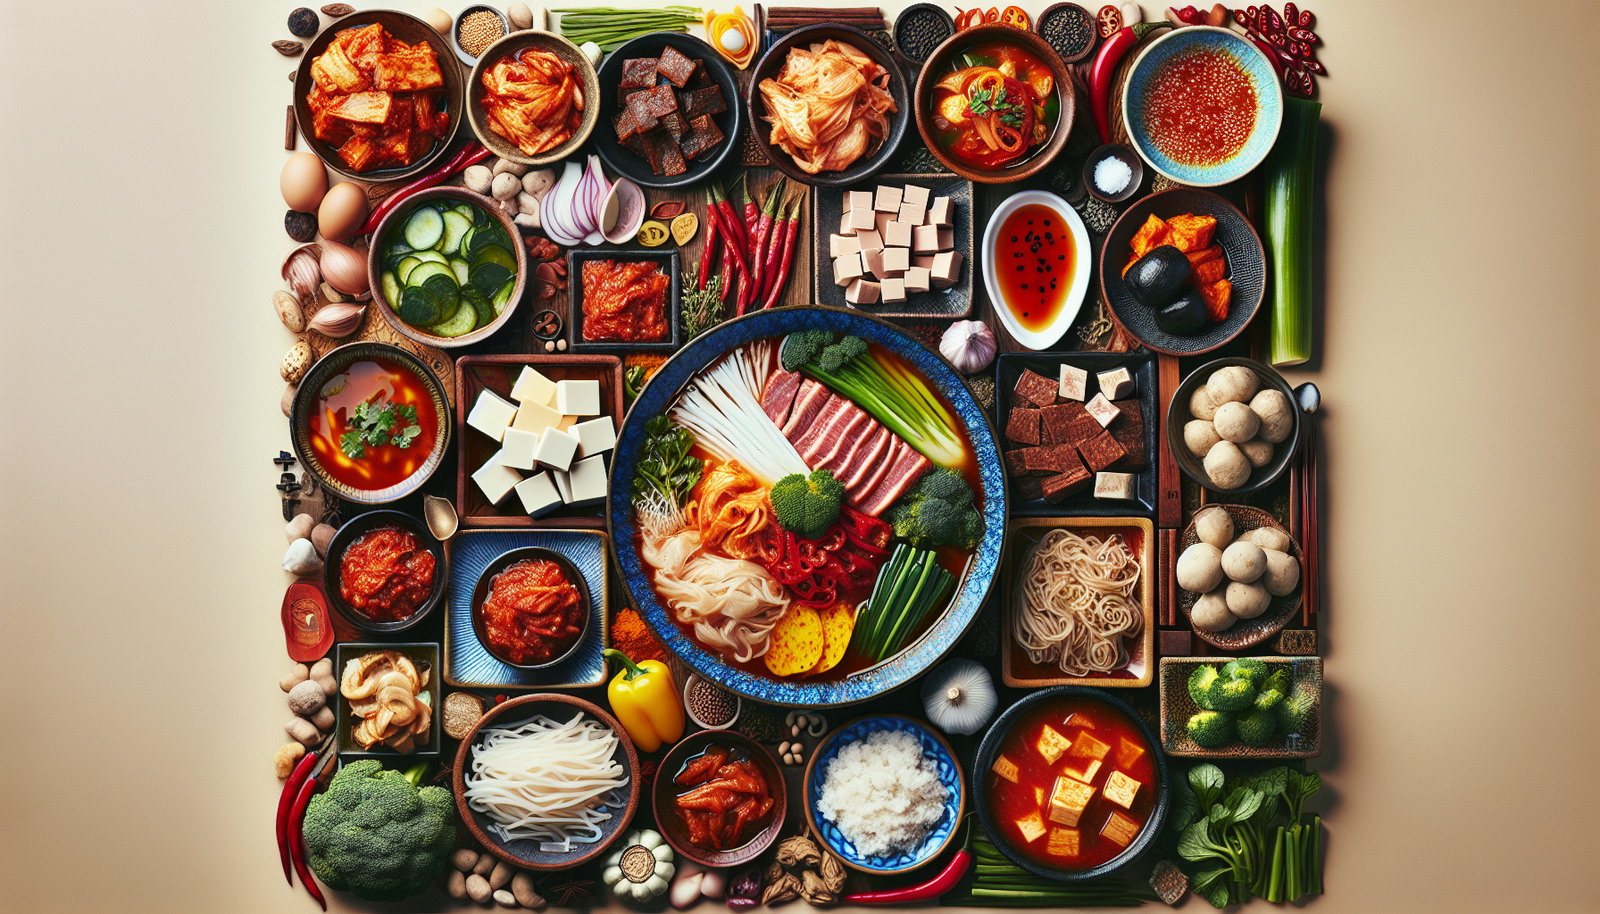 Can You Recommend A Variety Of Jjigae (stew) Recipes And Their Origins?